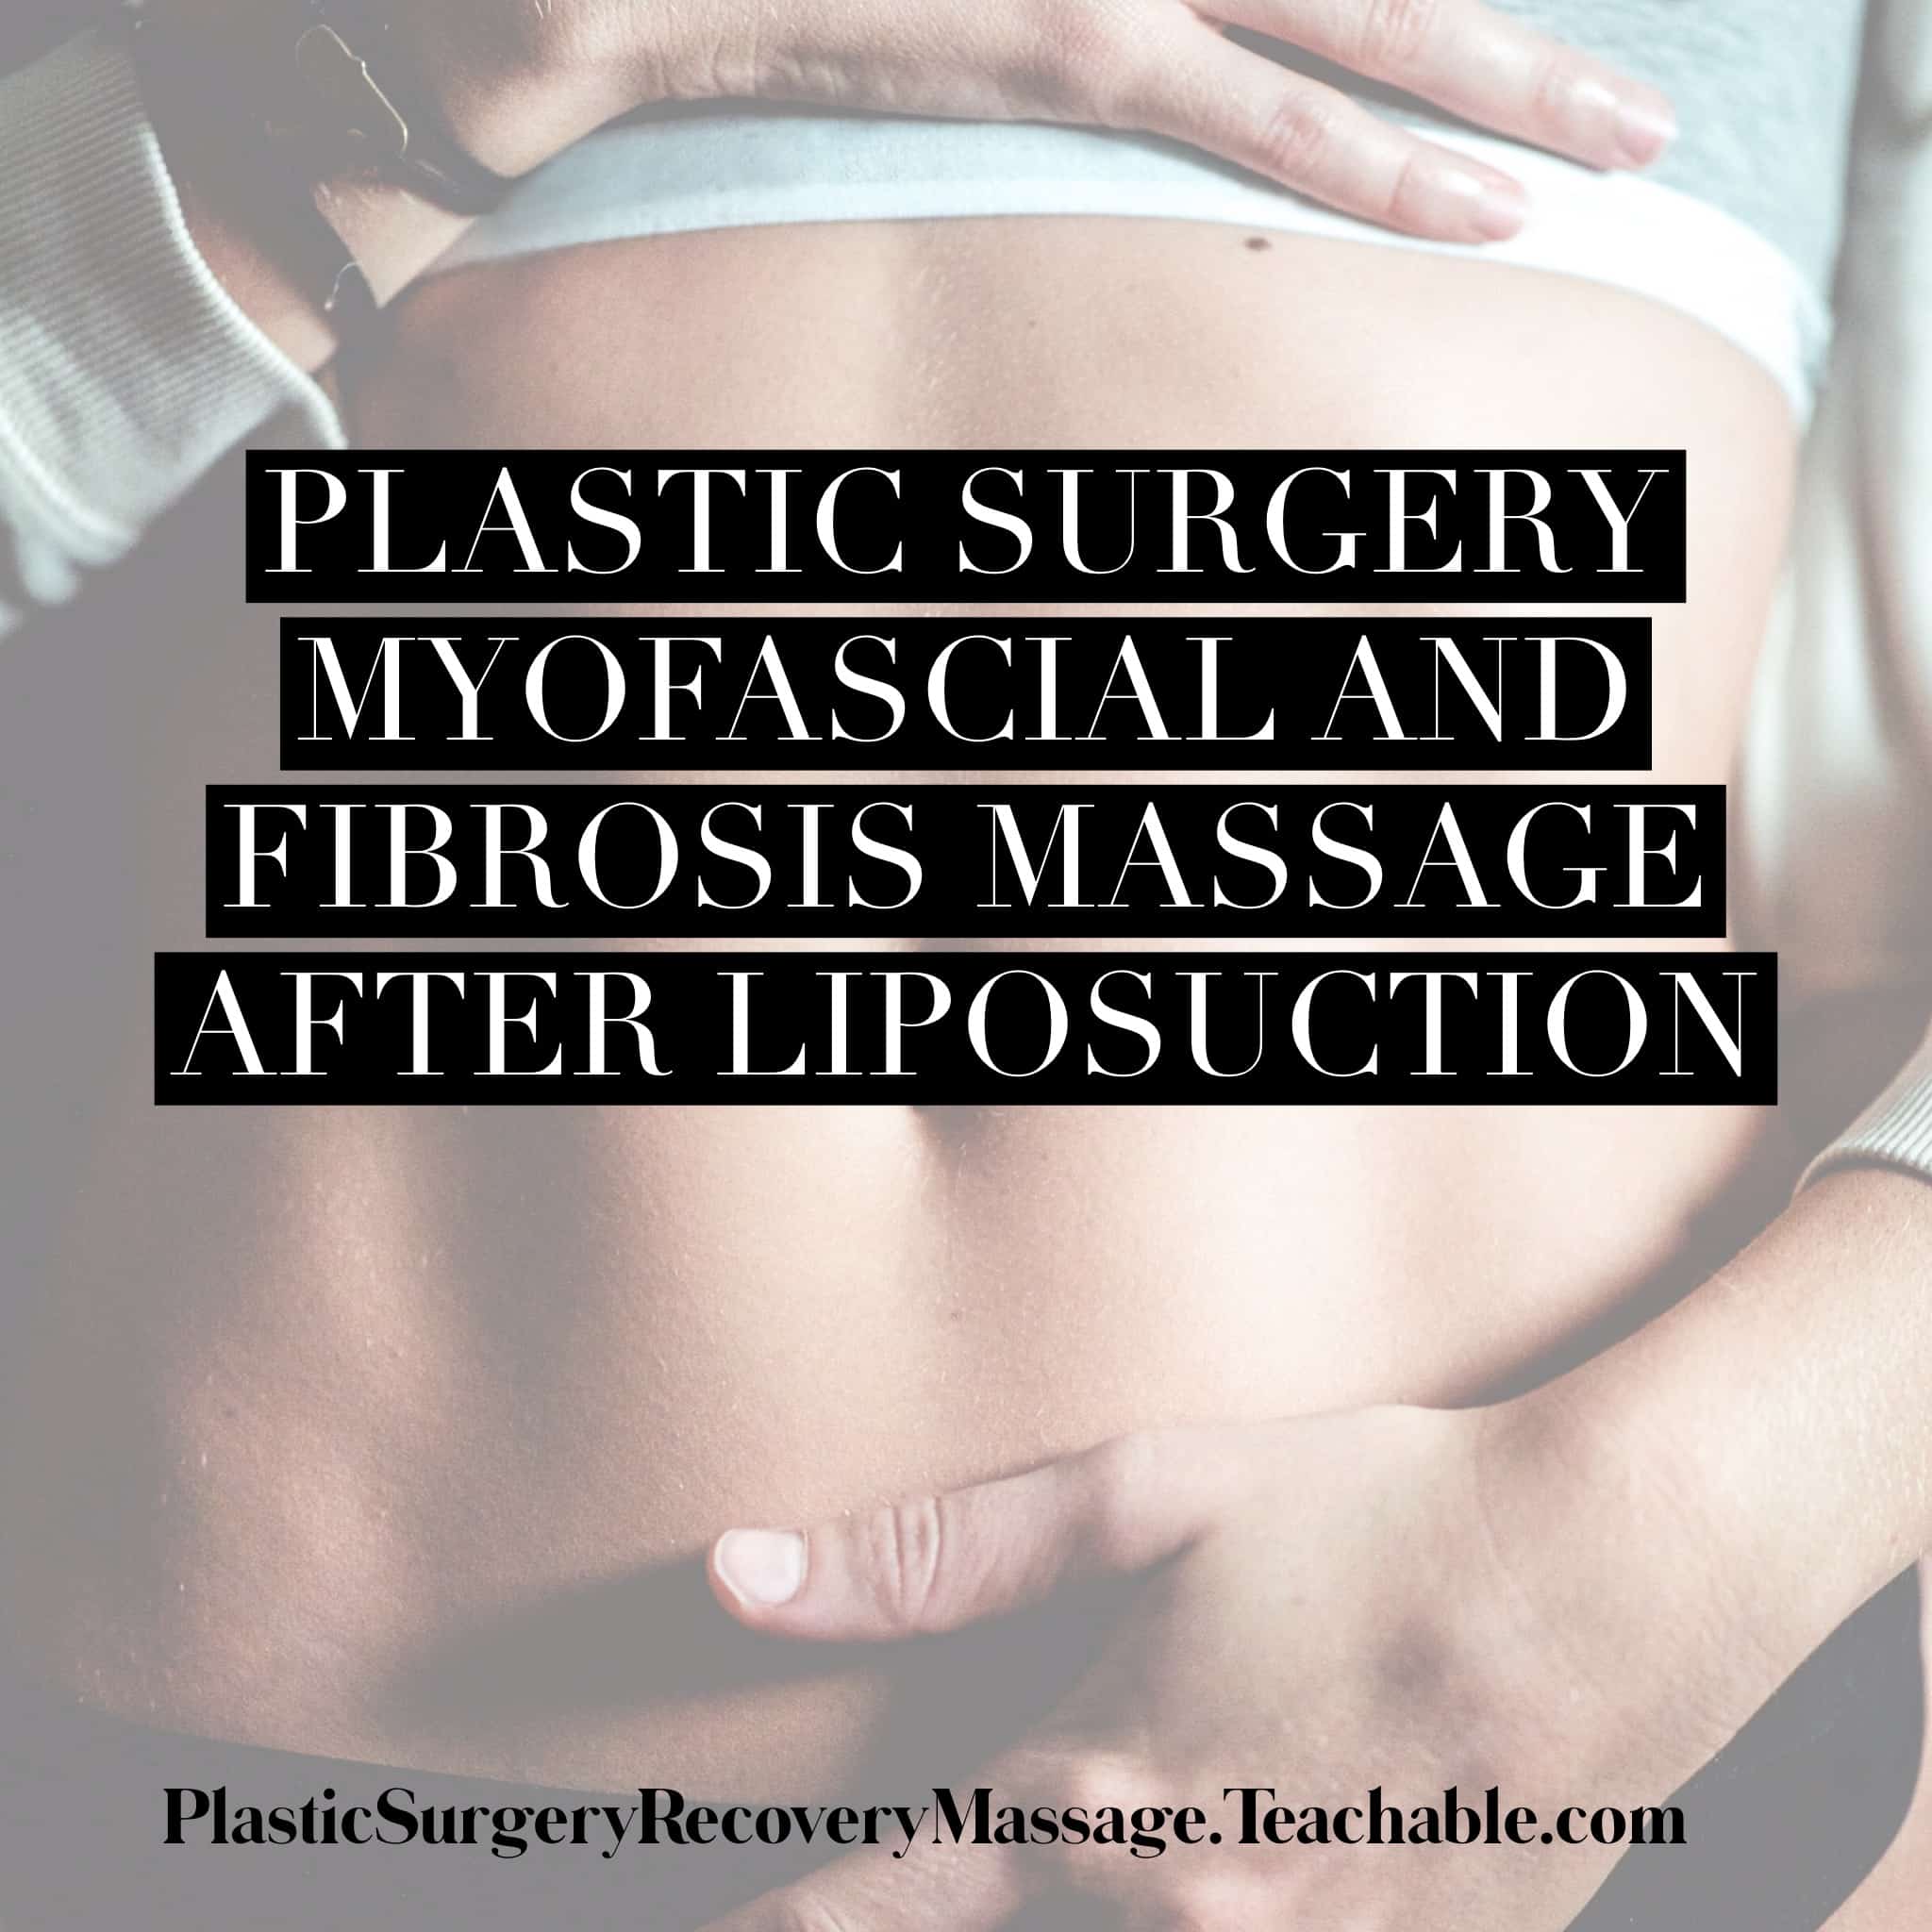 Plastic Surgery Myofascial and Fibrosis Massage (LIVE IN SAN DIEGO)